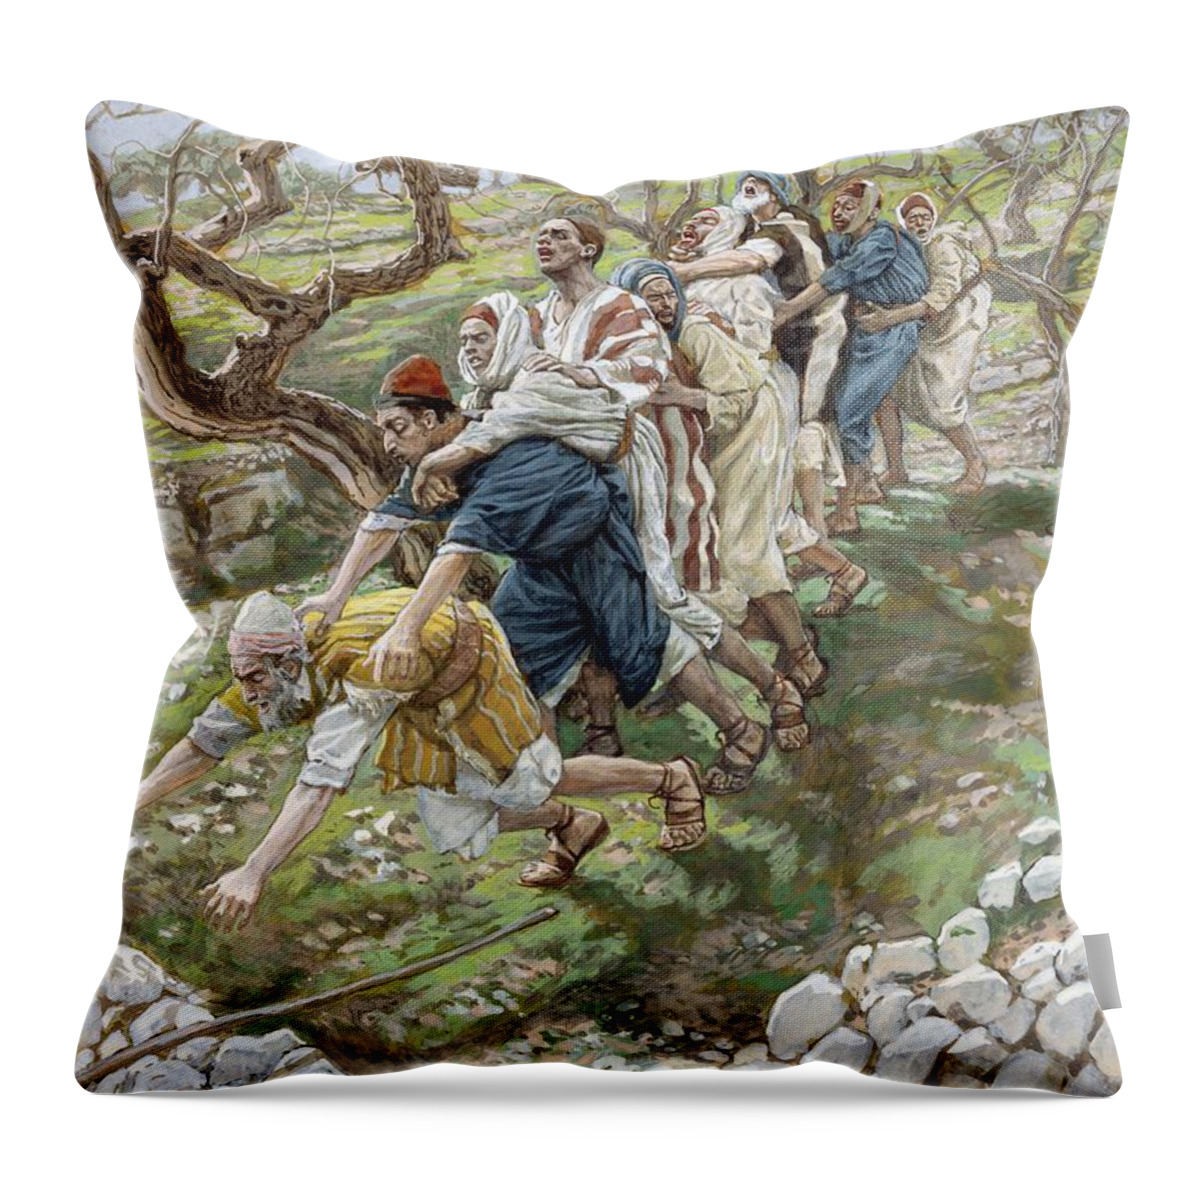 Sight Throw Pillow featuring the painting The Blind Leading the Blind by Tissot